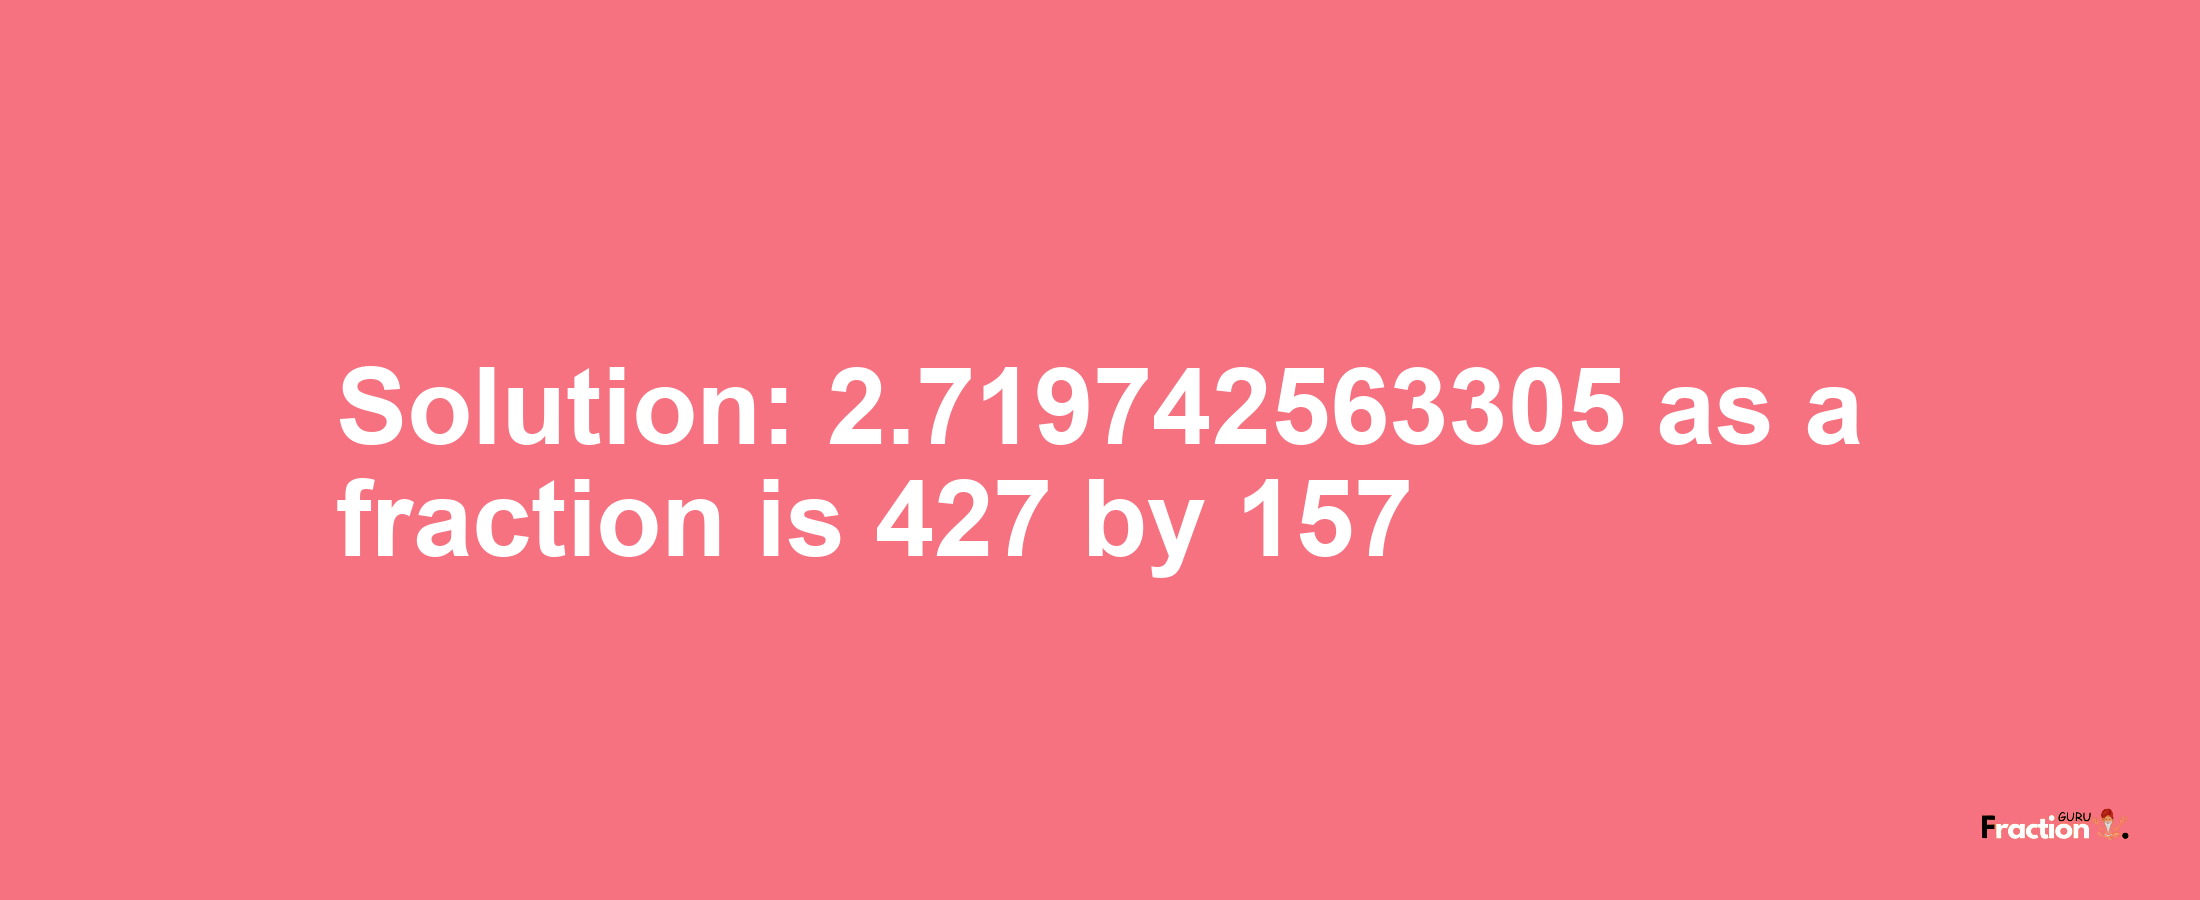 Solution:2.719742563305 as a fraction is 427/157